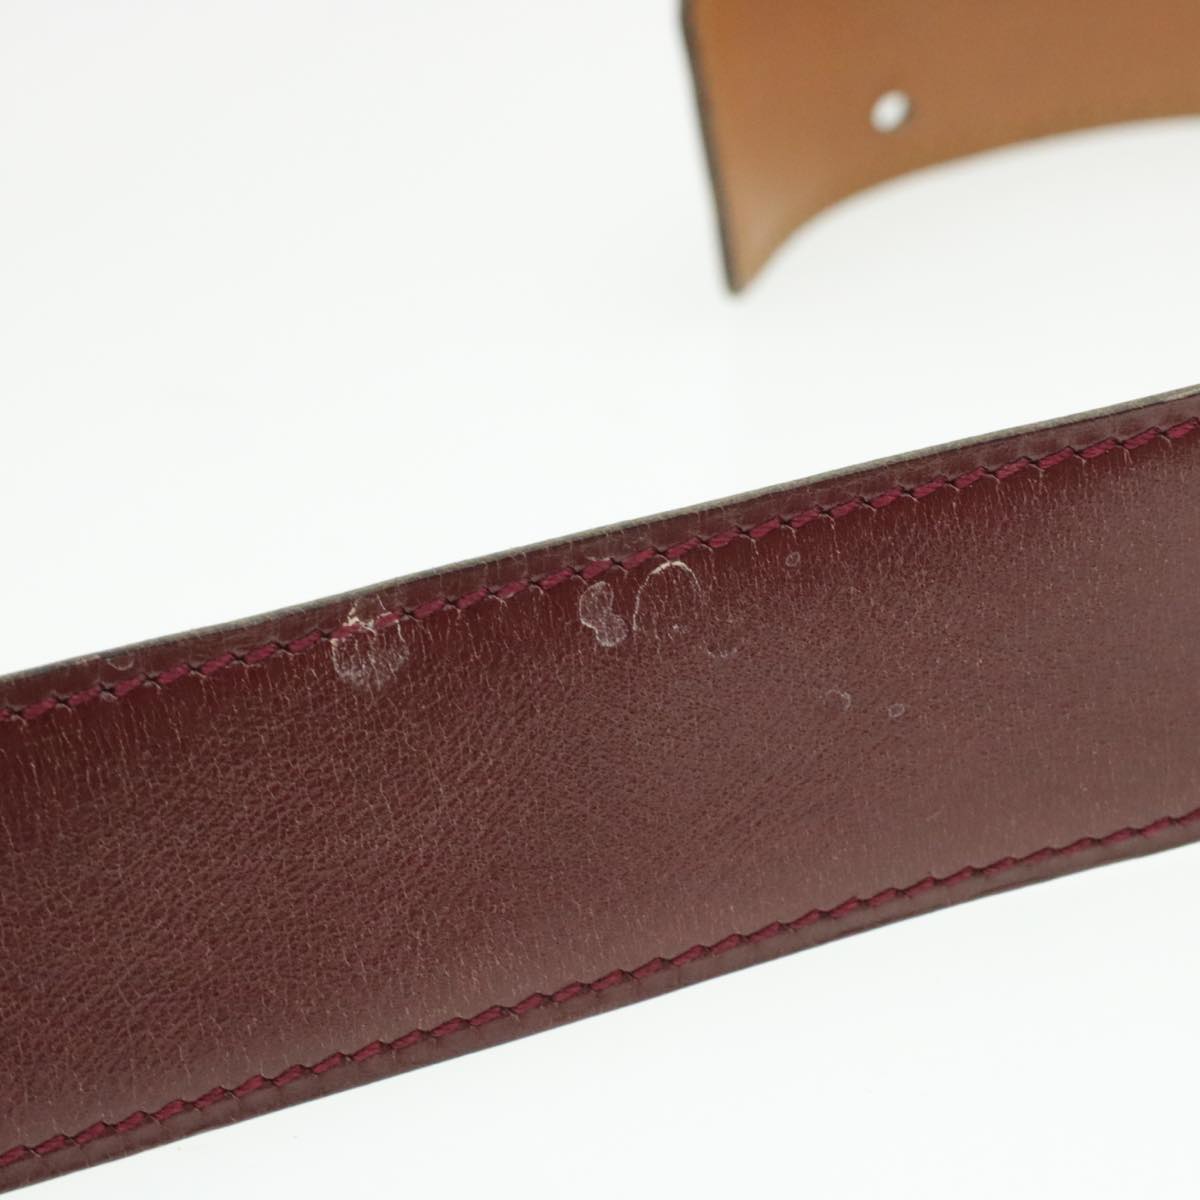 HERMES Leather Belt Constance H Buckle Red Auth rd829 | eBay